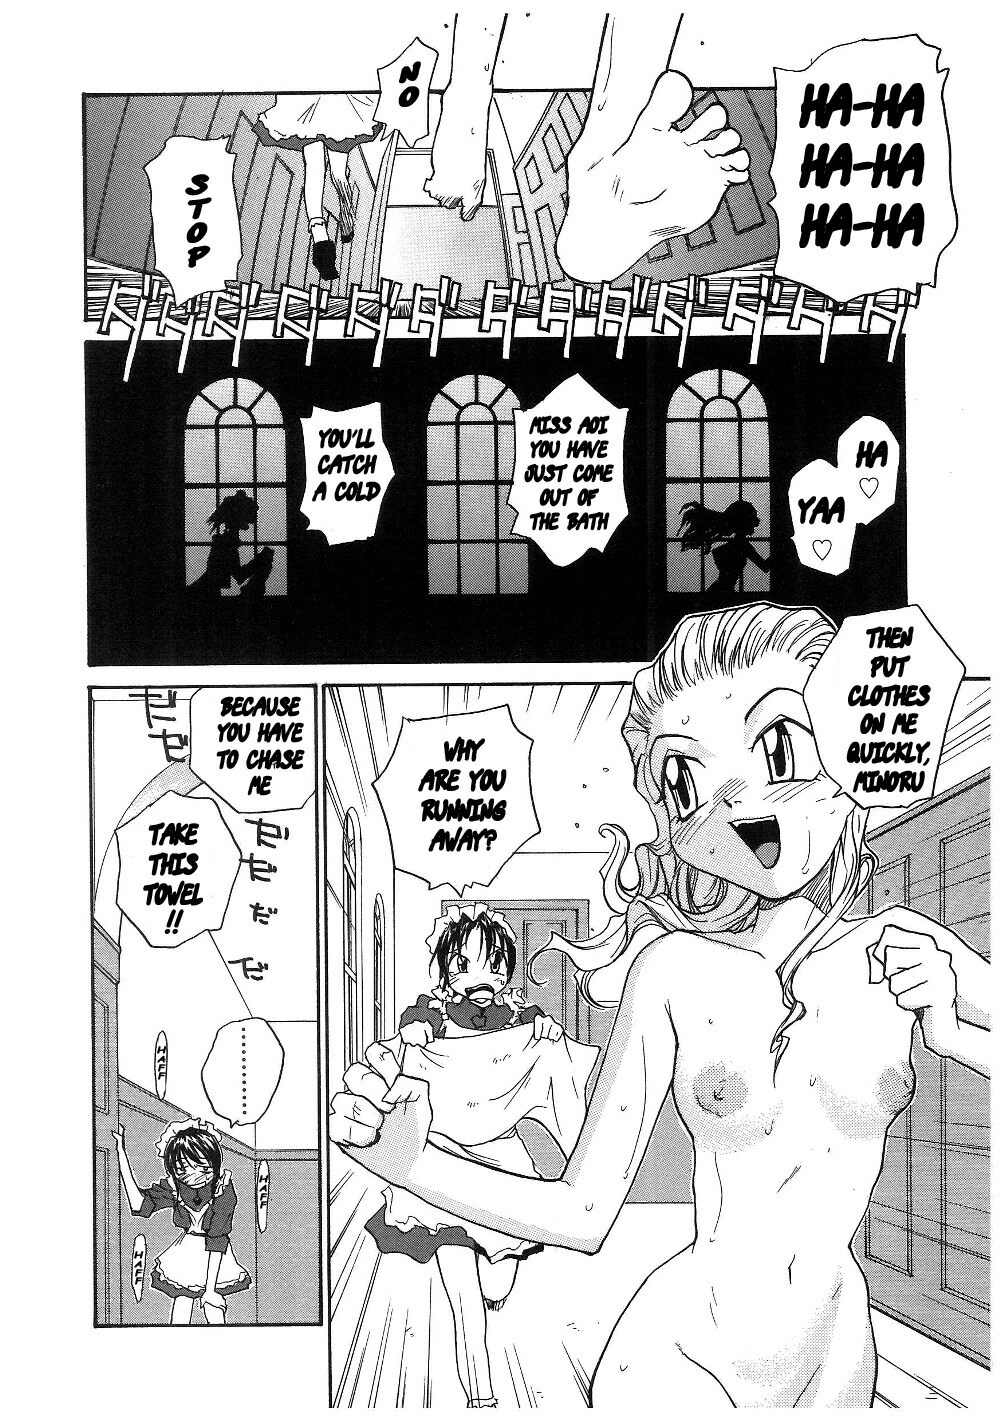 [RaTe] Milk Maid [English] [Stecaz] page 11 full